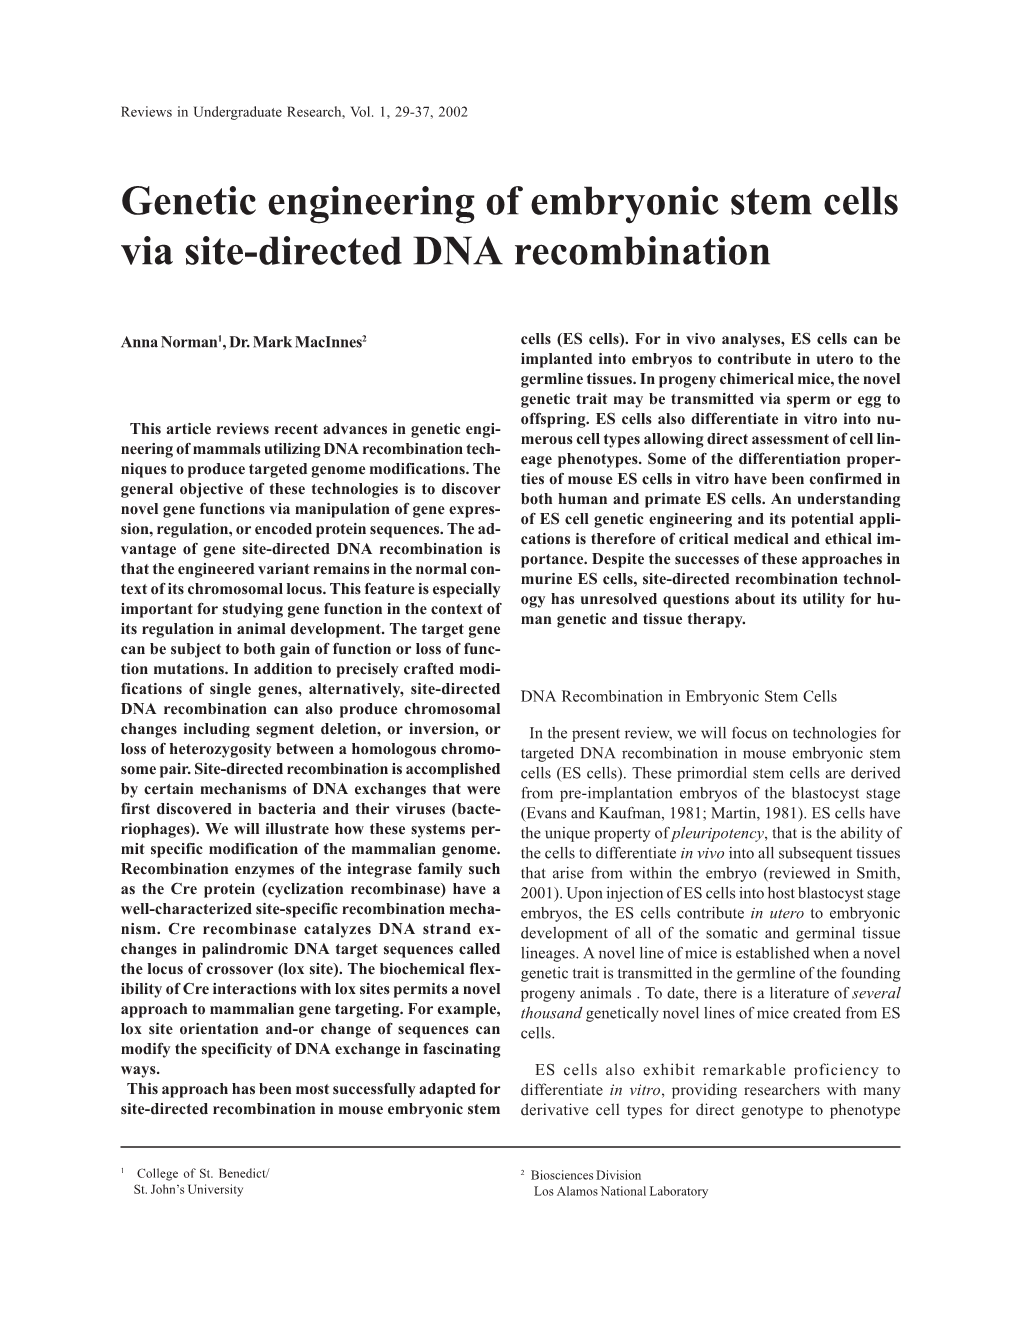 Genetic Engineering of Embryonic Stem Cells Via Site-Directed DNA Recombination